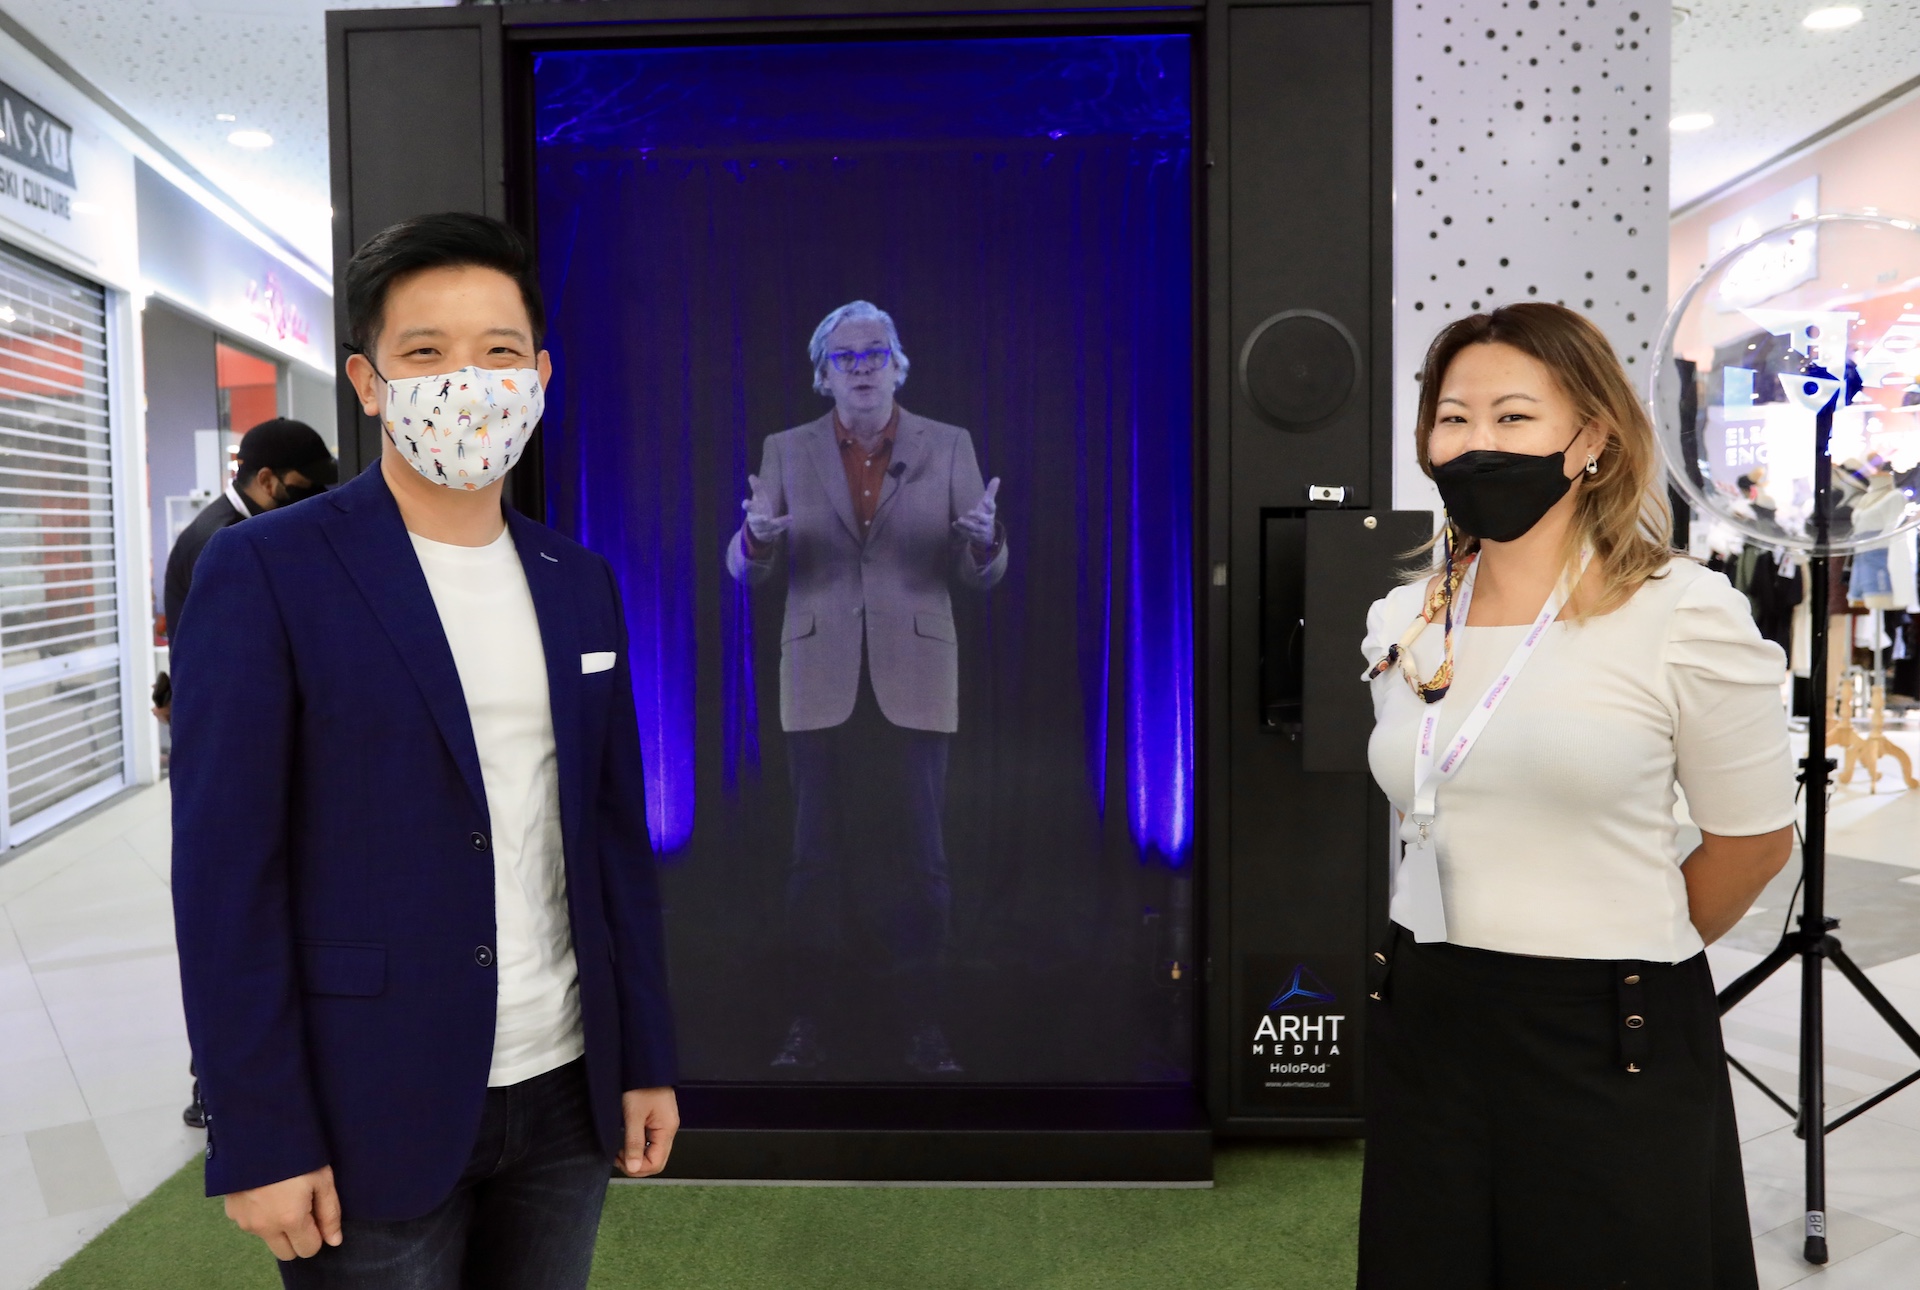 ARHT Media's HoloPresence Technology Featured at EPITOME -The In-Person Young Entrepreneurship Conference In Singapore